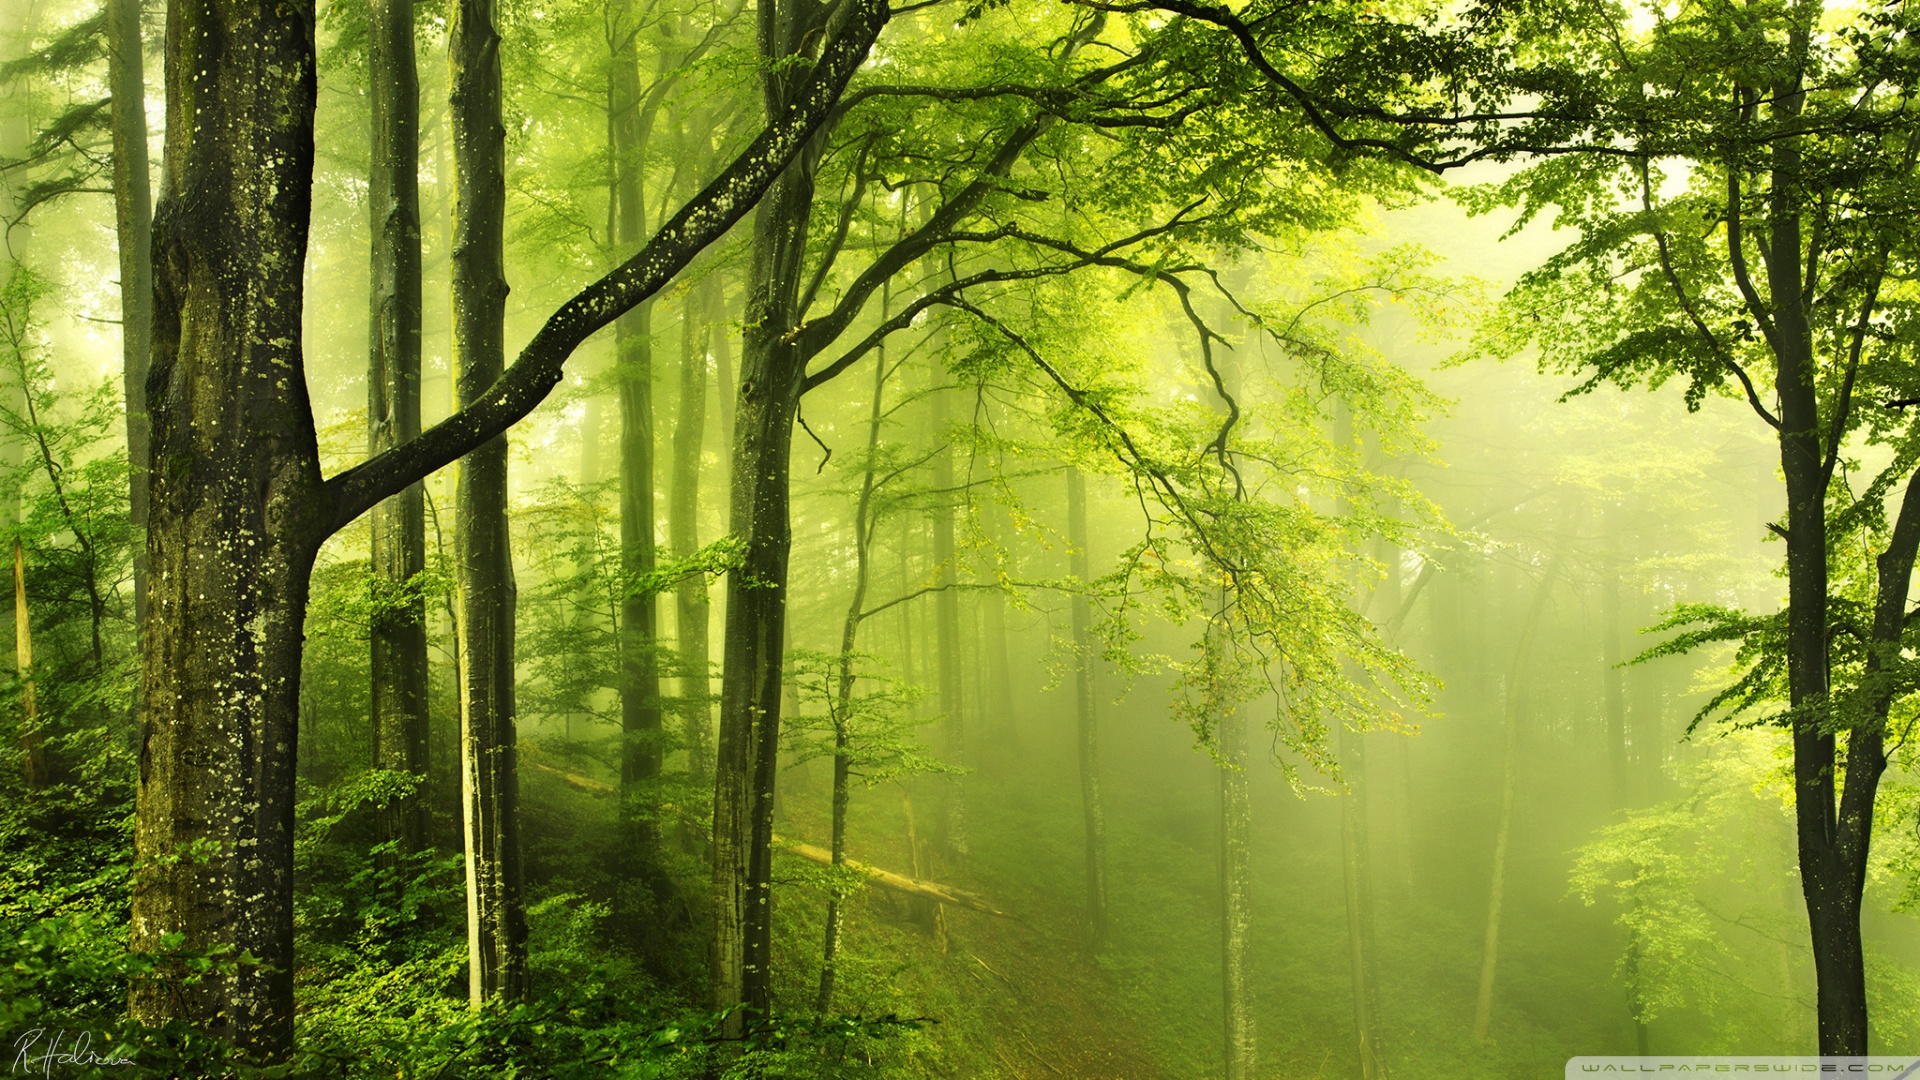 25 Hd Green Forest Wallpapers On Wallpapersafari